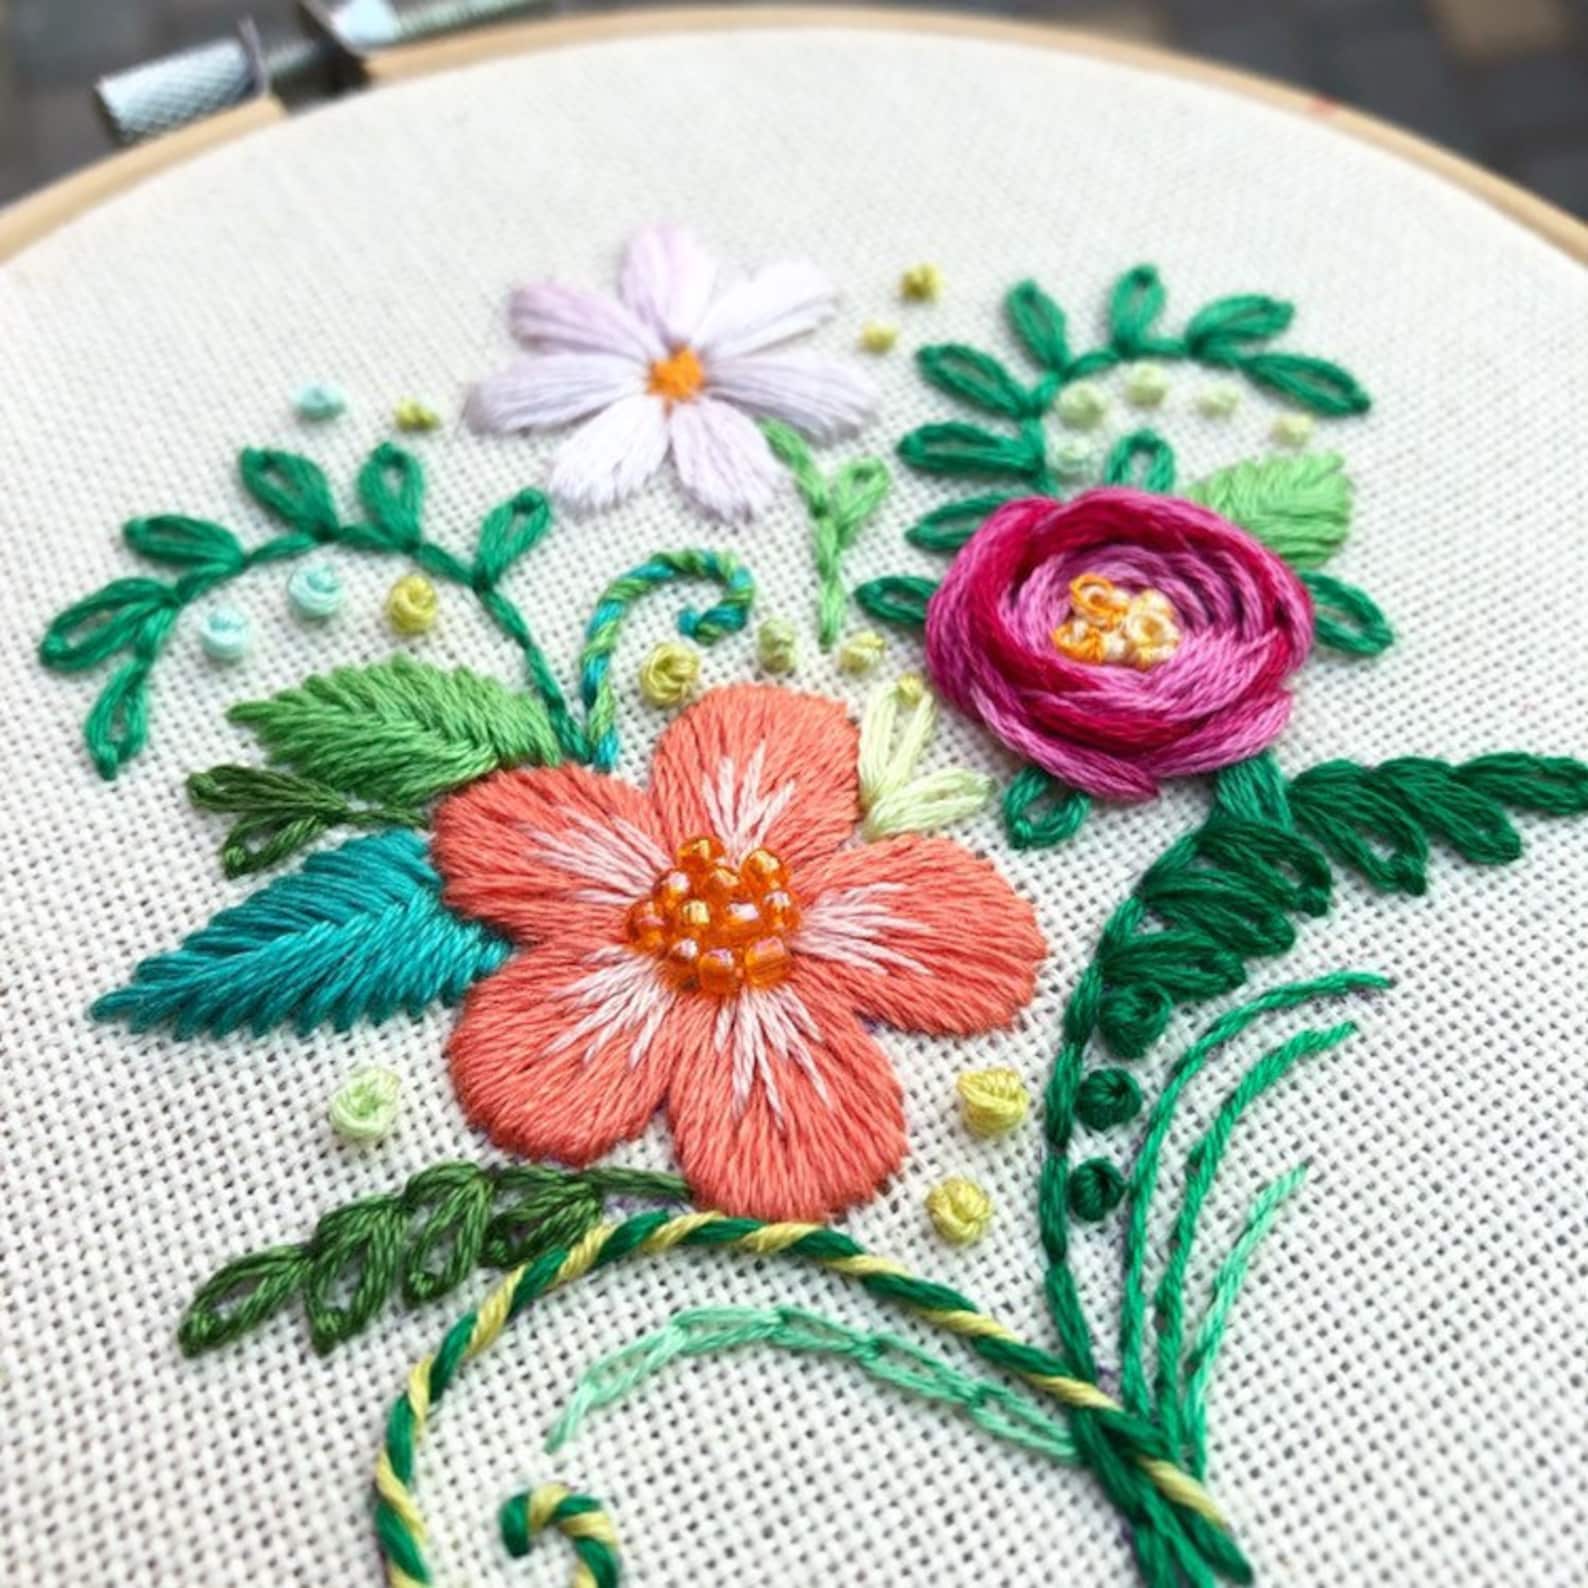 Tiny Bouquet Hand Embroidery Pattern Digital Download PDF | Etsy